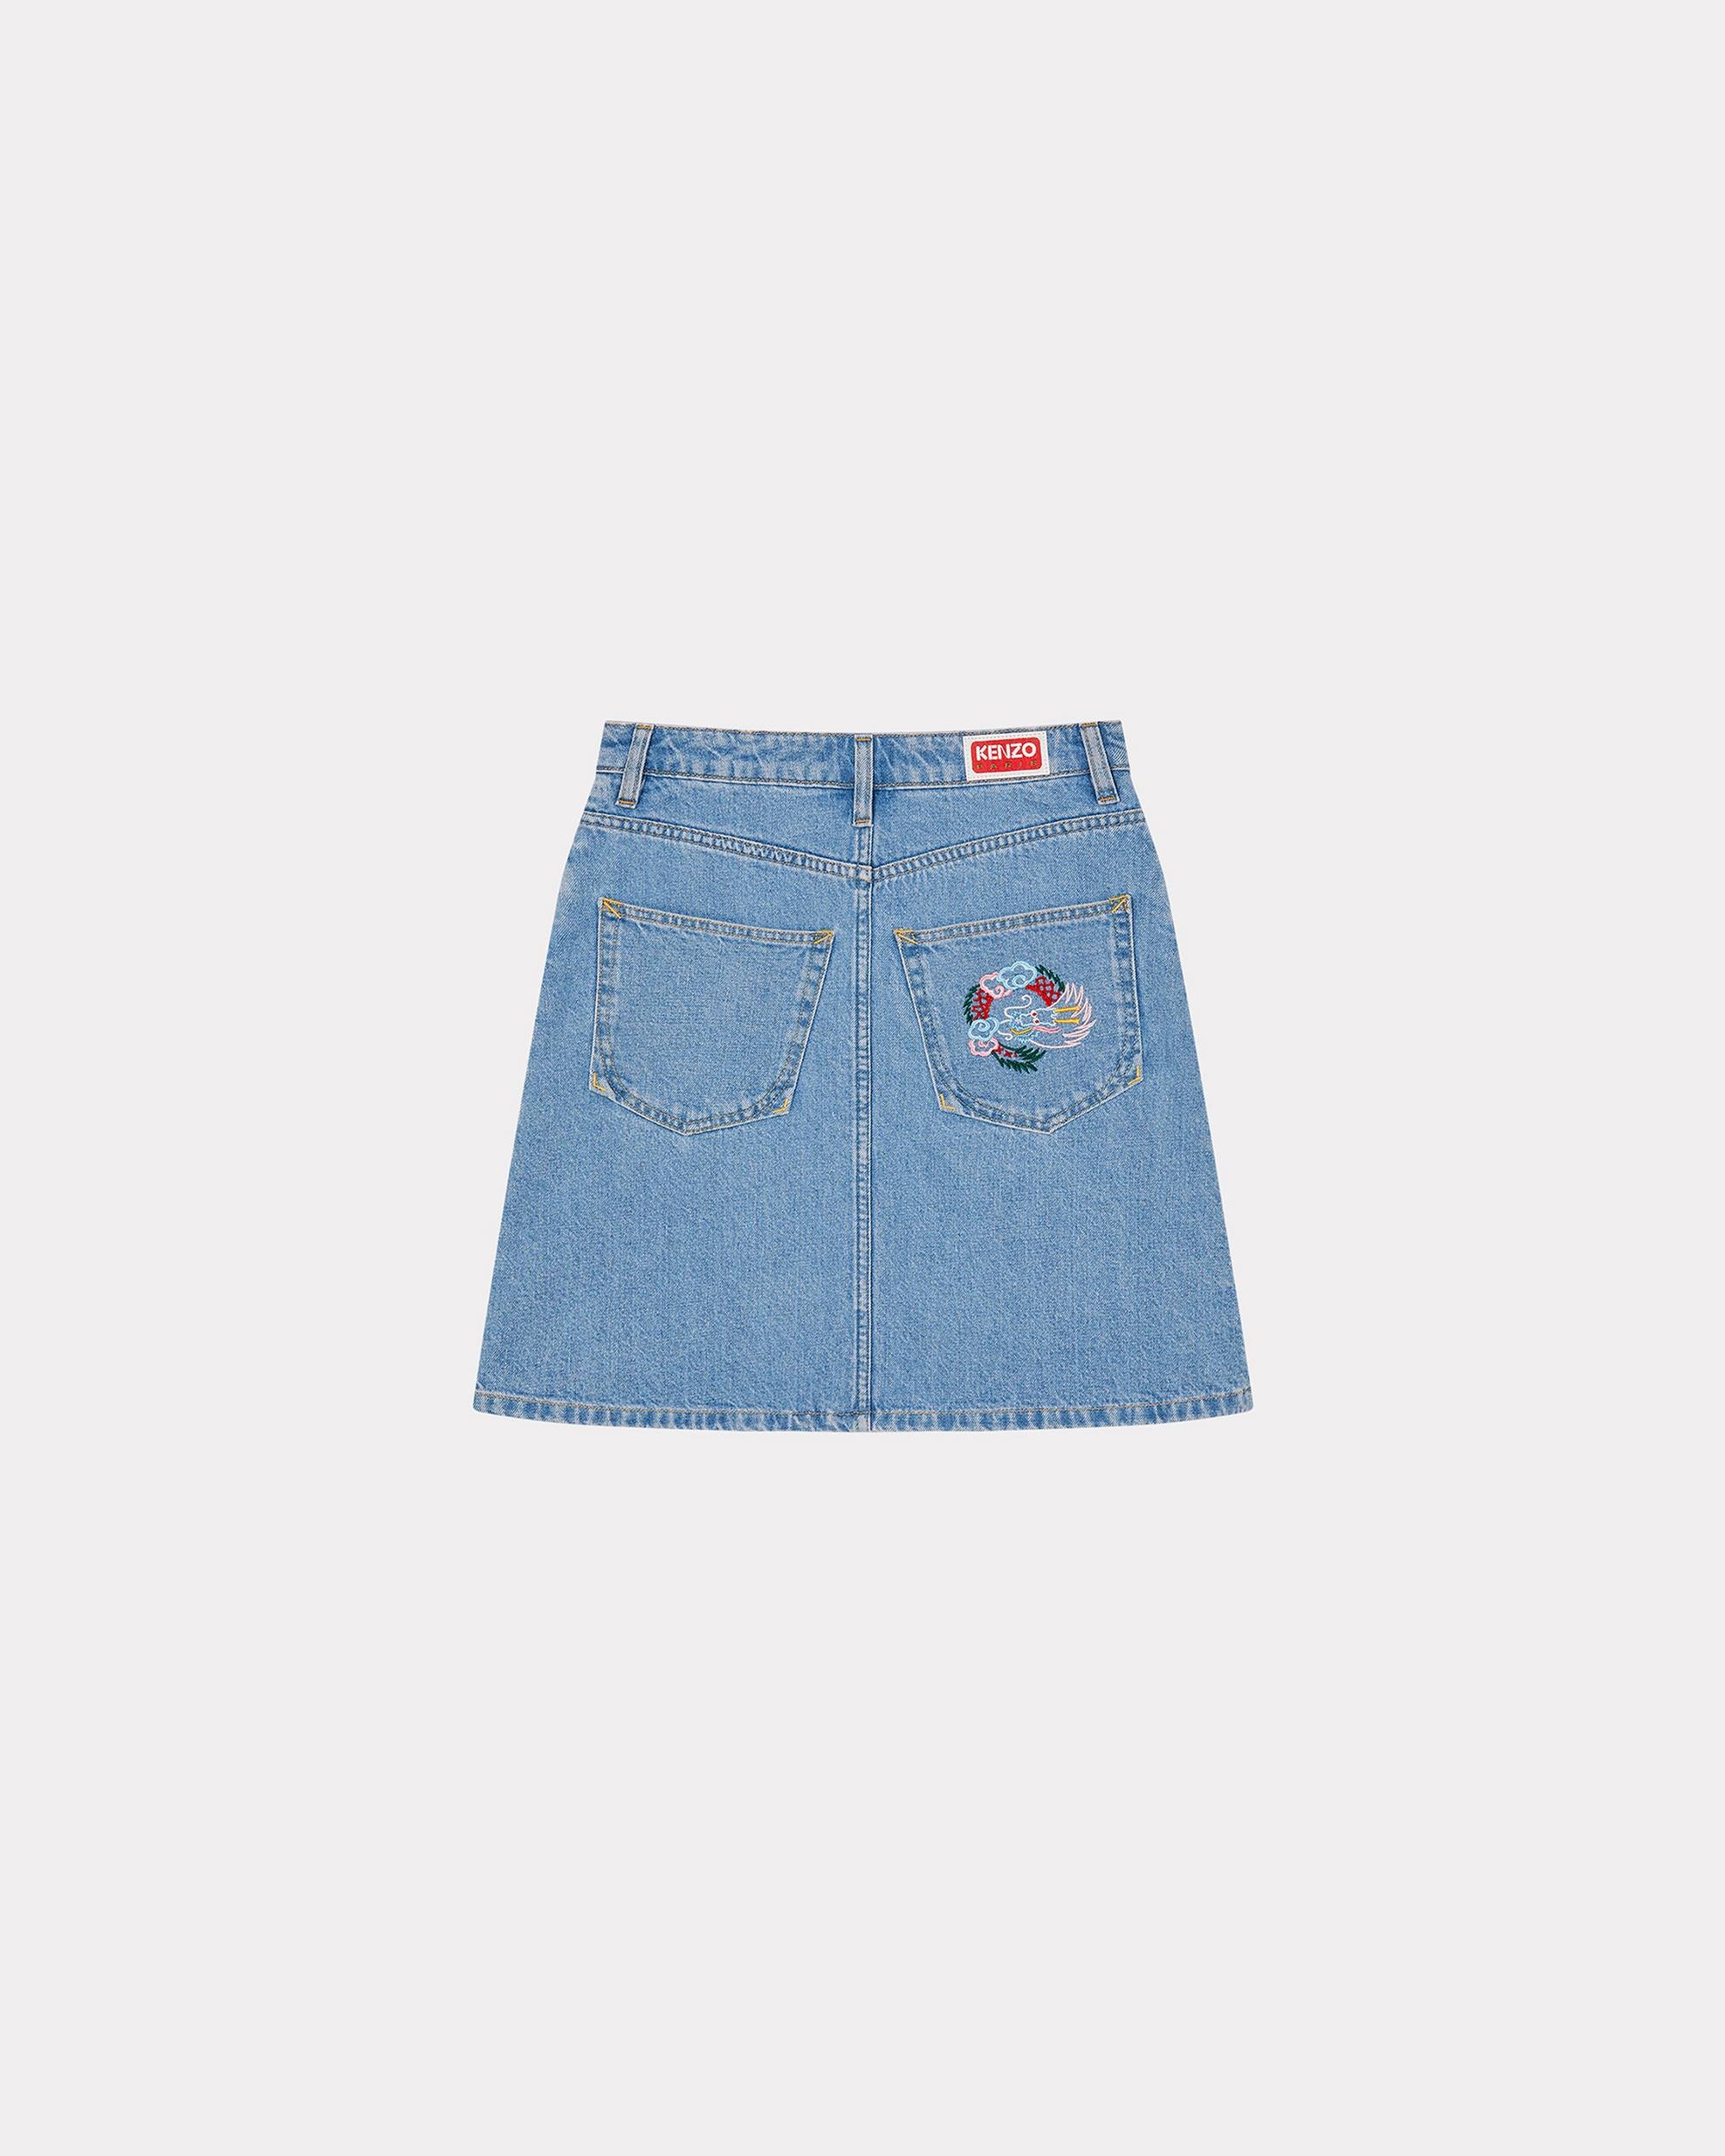 'Year of the Dragon' embroidered Japanese denim miniskirt - 2